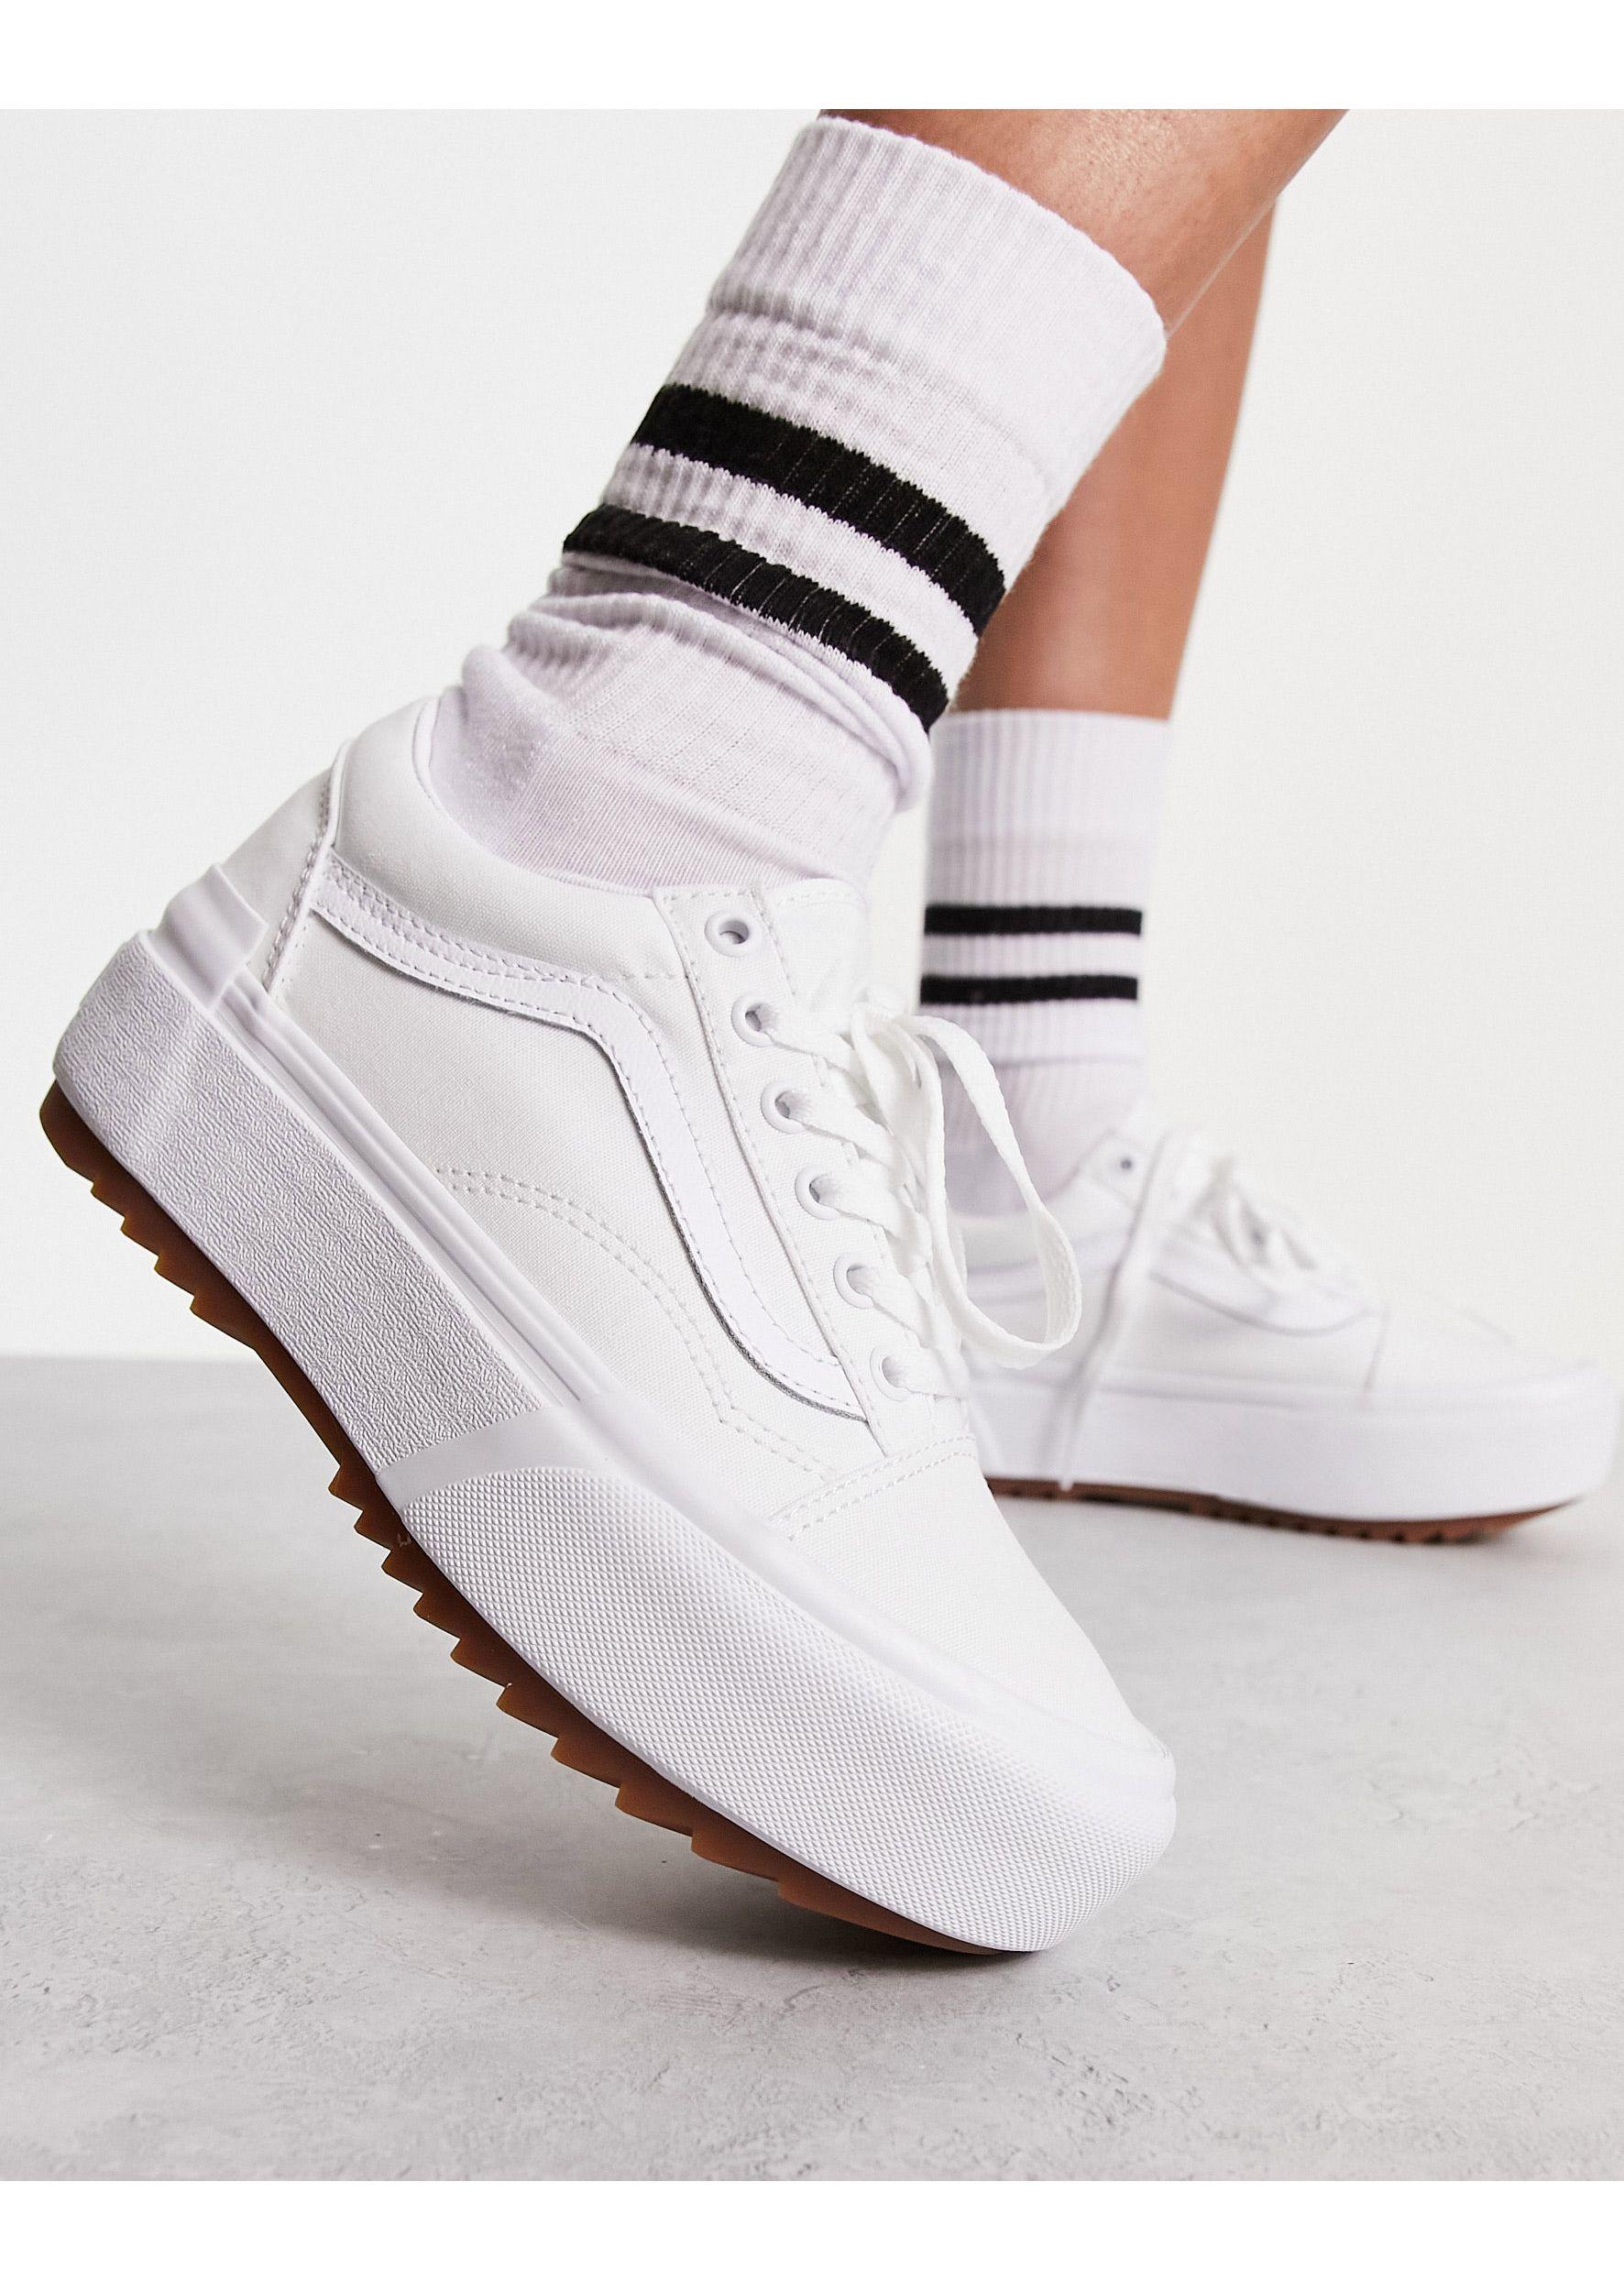 Vans Old Skool Stacked Sneakers With Gum Sole in White | Lyst